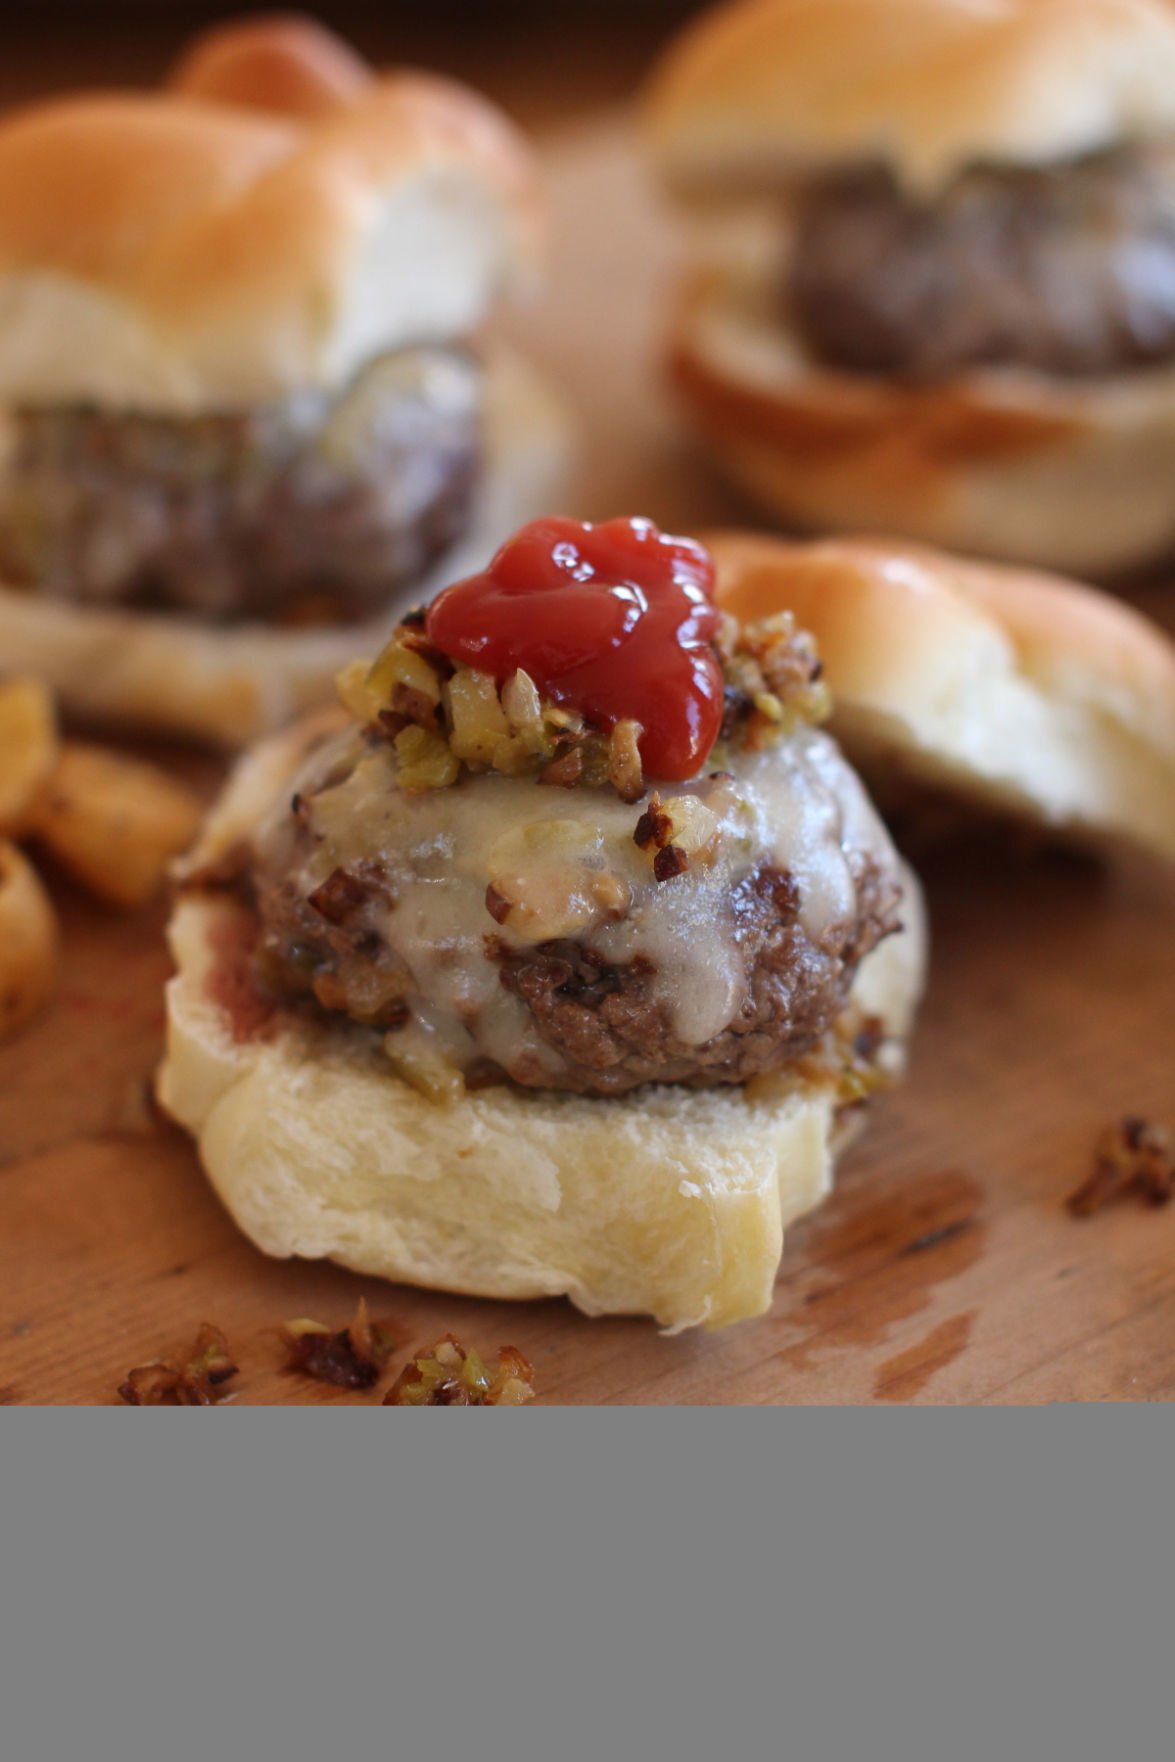 A little beer is a lot of flavor in these Super Bowl sliders